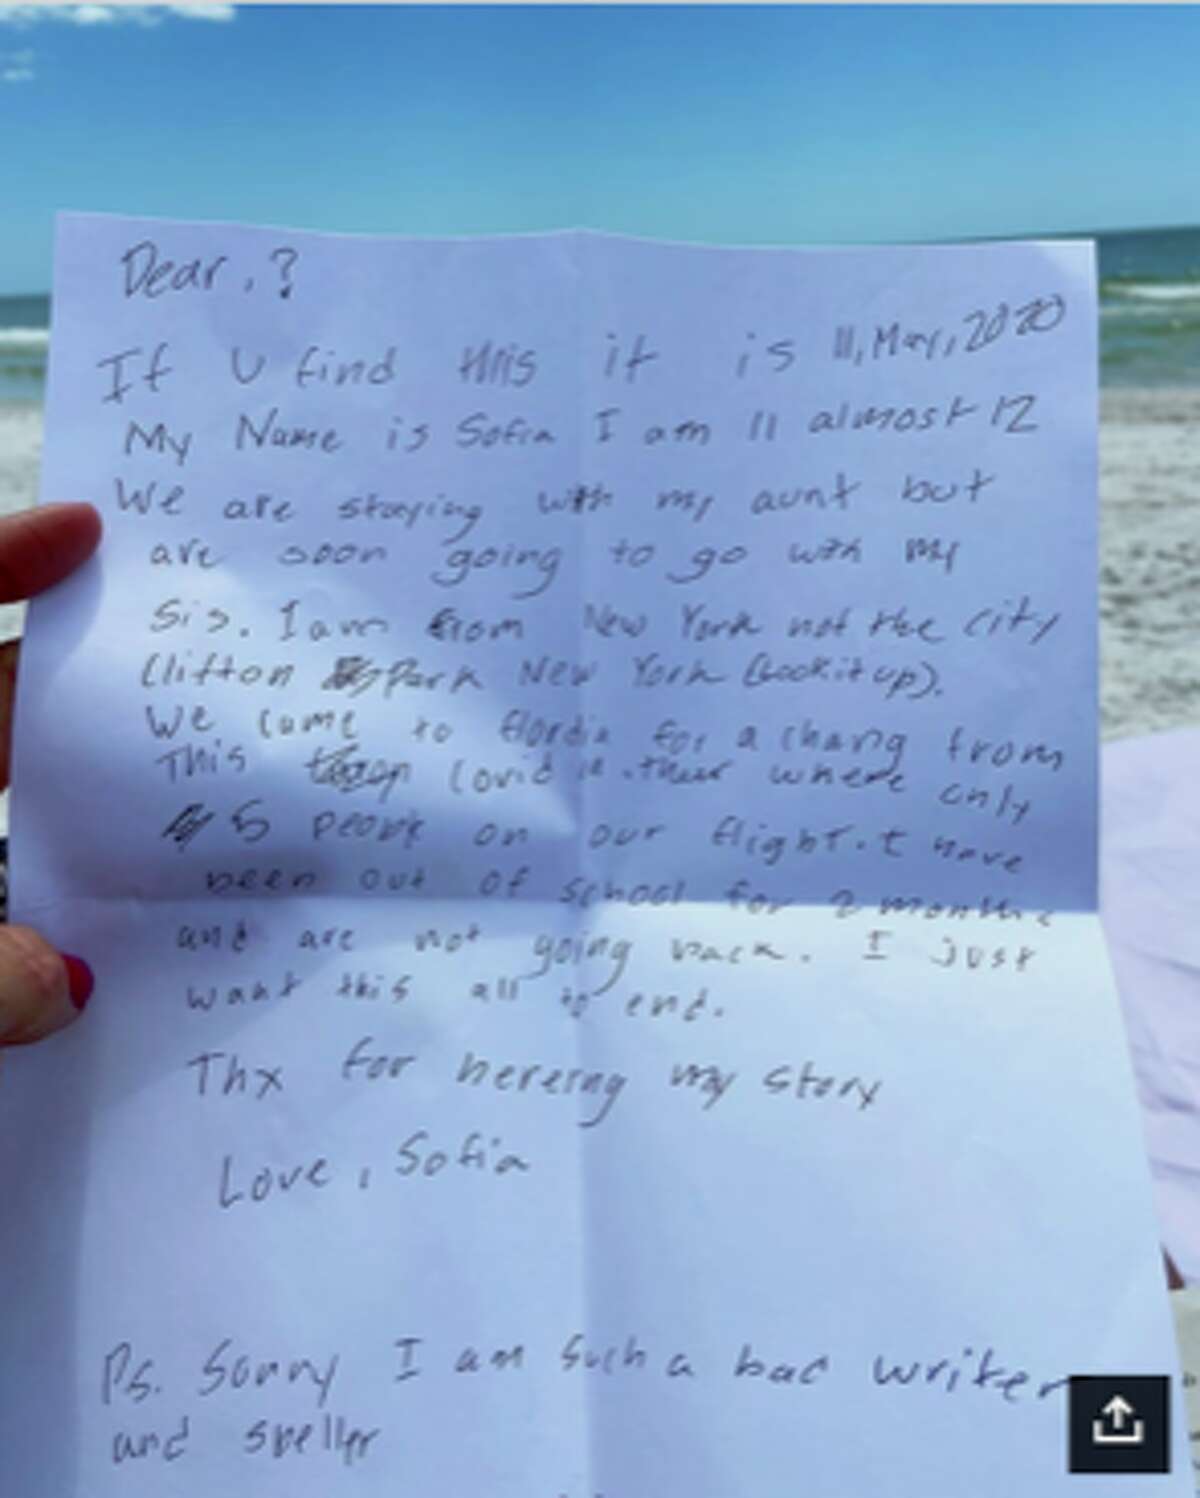 Sofia Wilson wrote this letter that traveled 725 miles from Fort Lauderdale to Holden Beach in North Carolina.